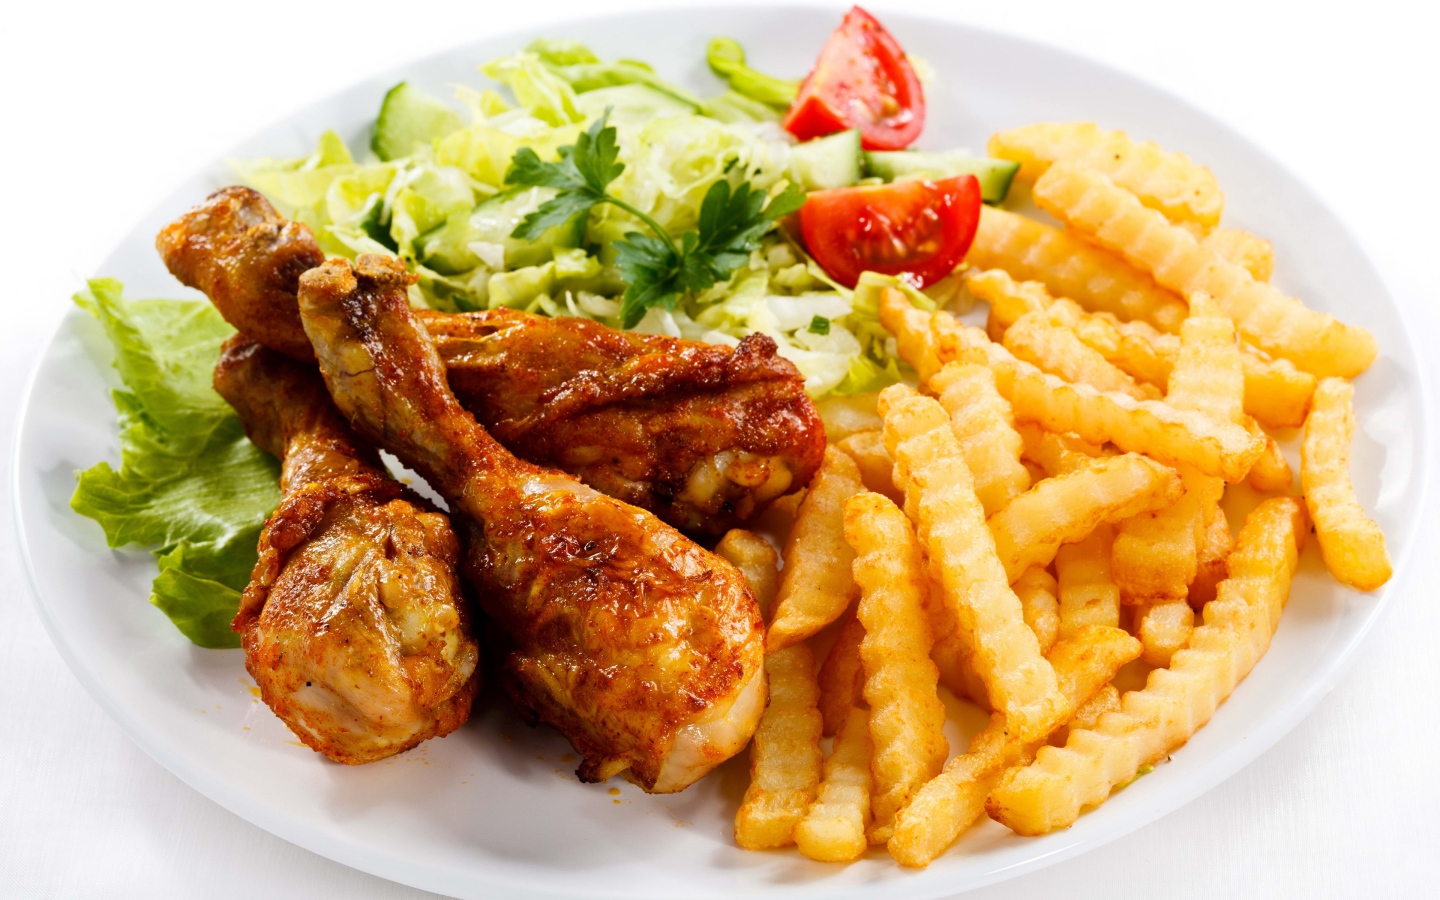 Fried chicken legs with french fries and salad